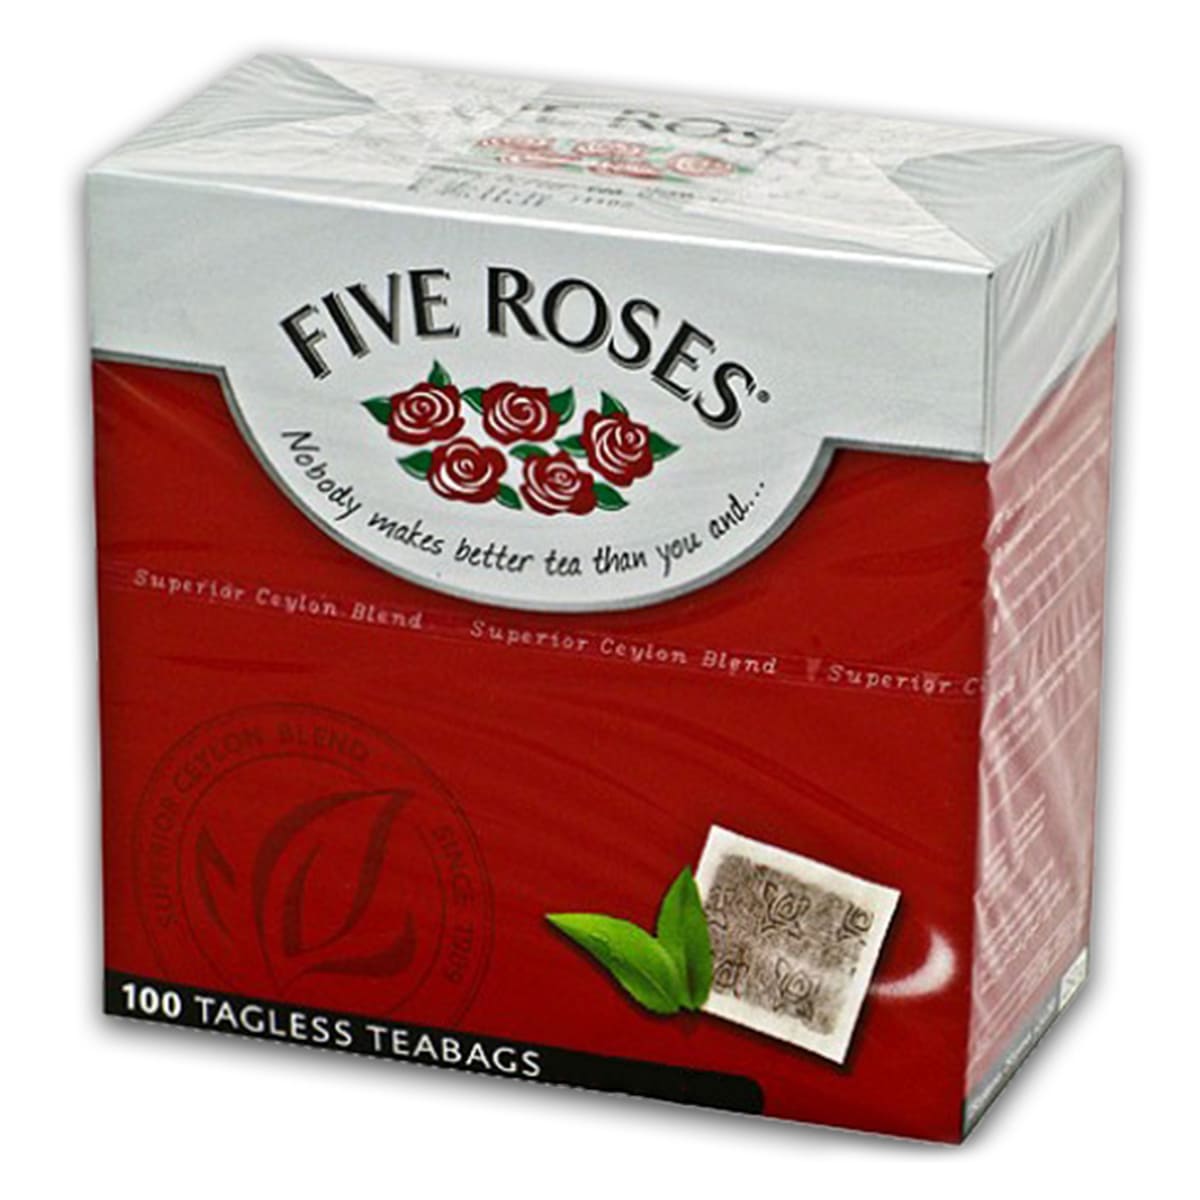 Buy Five Roses 100 Tagless Teabags - 250 gm